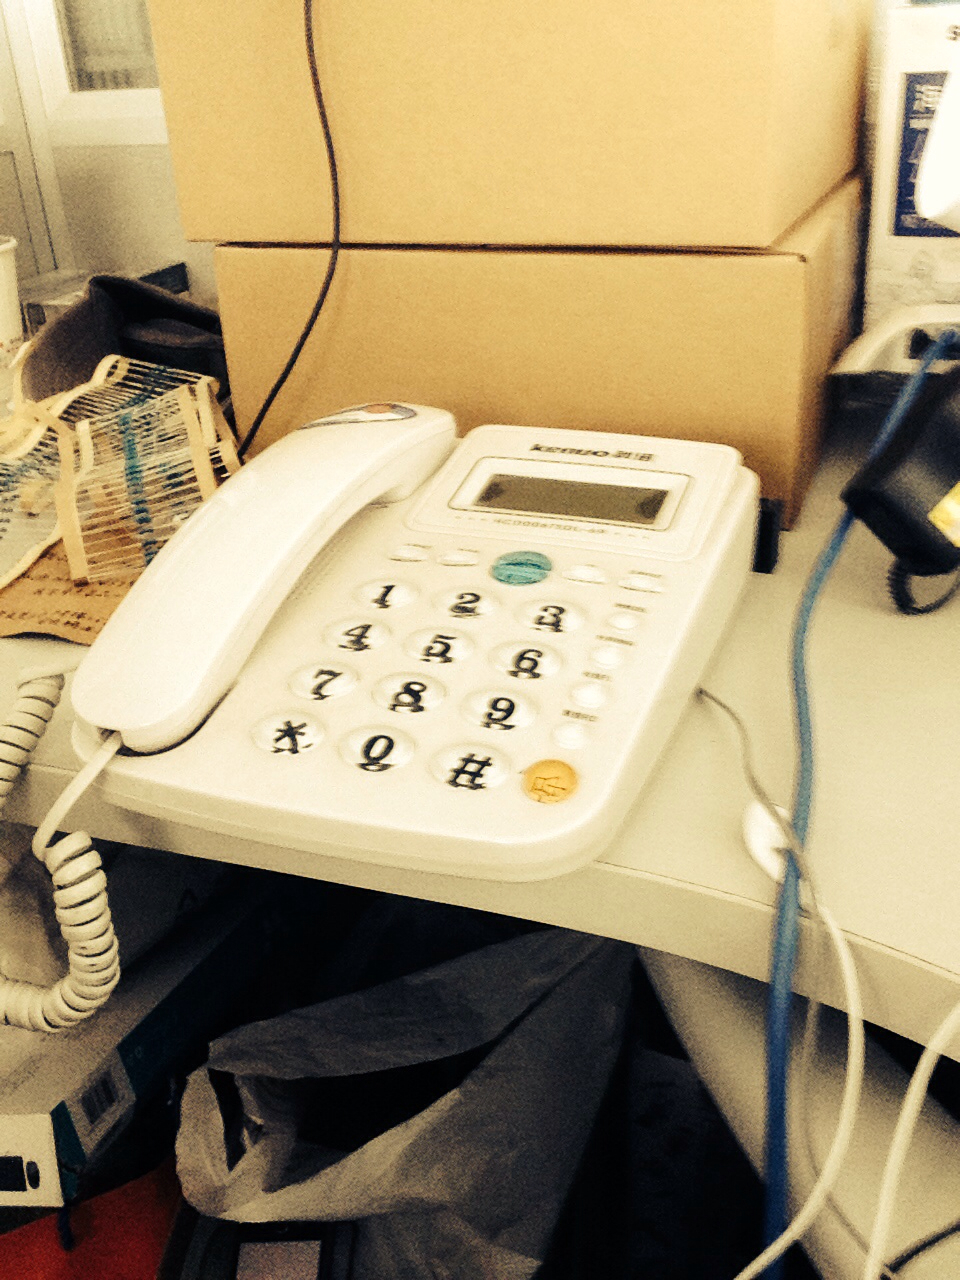 telephone with cords and papers on a desk